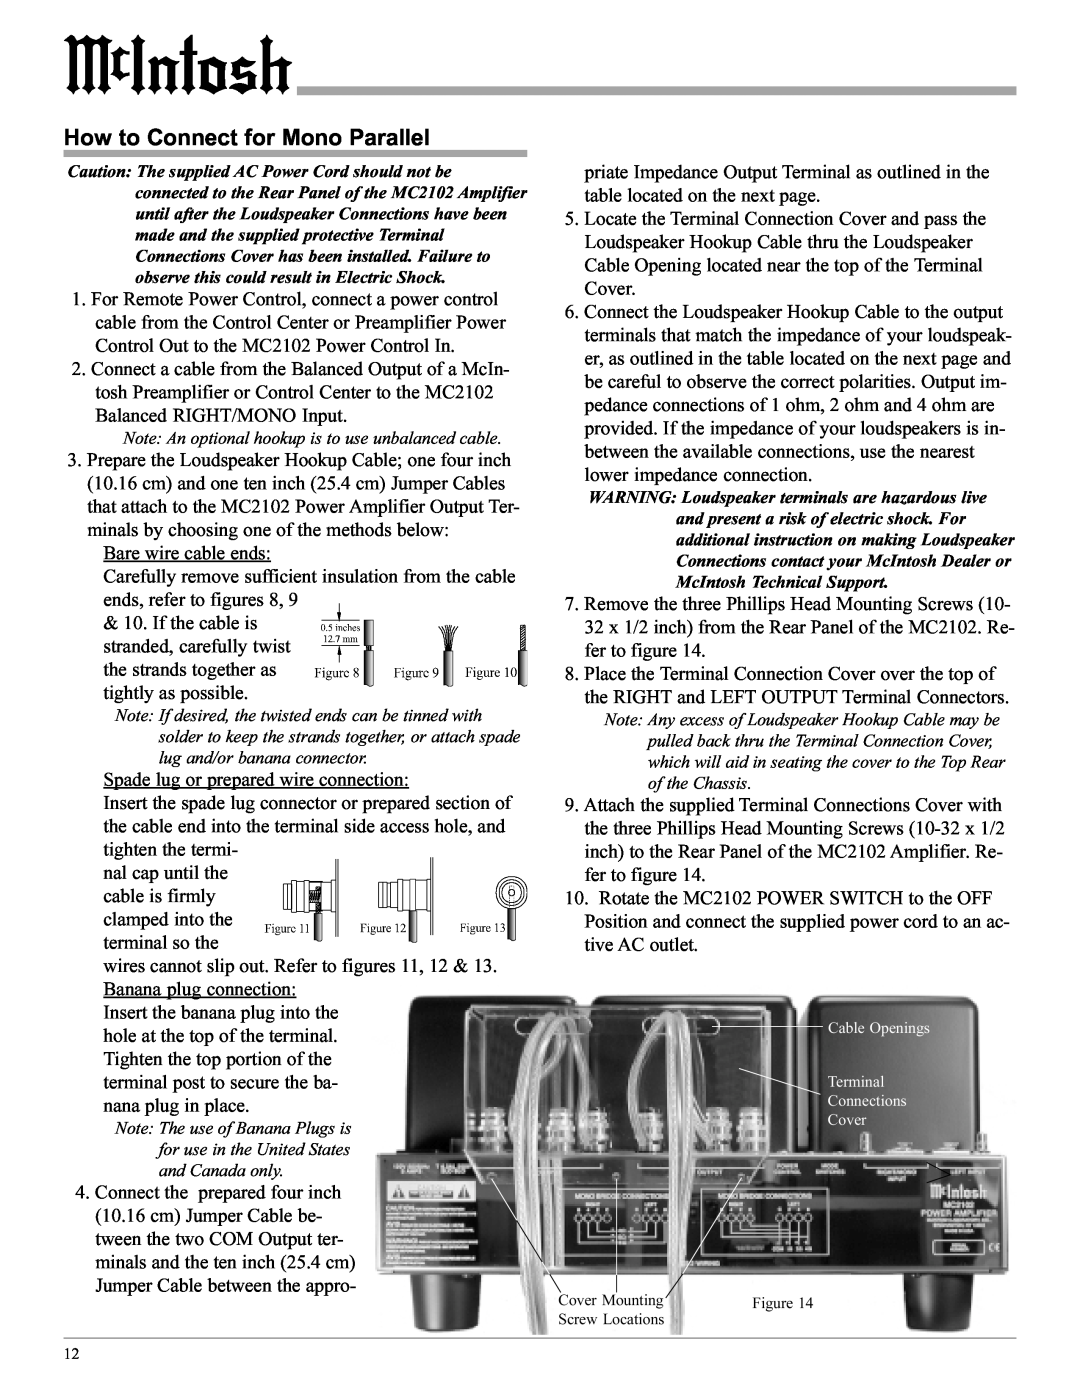 McIntosh MC2102 manual How to Connect for Mono Parallel 